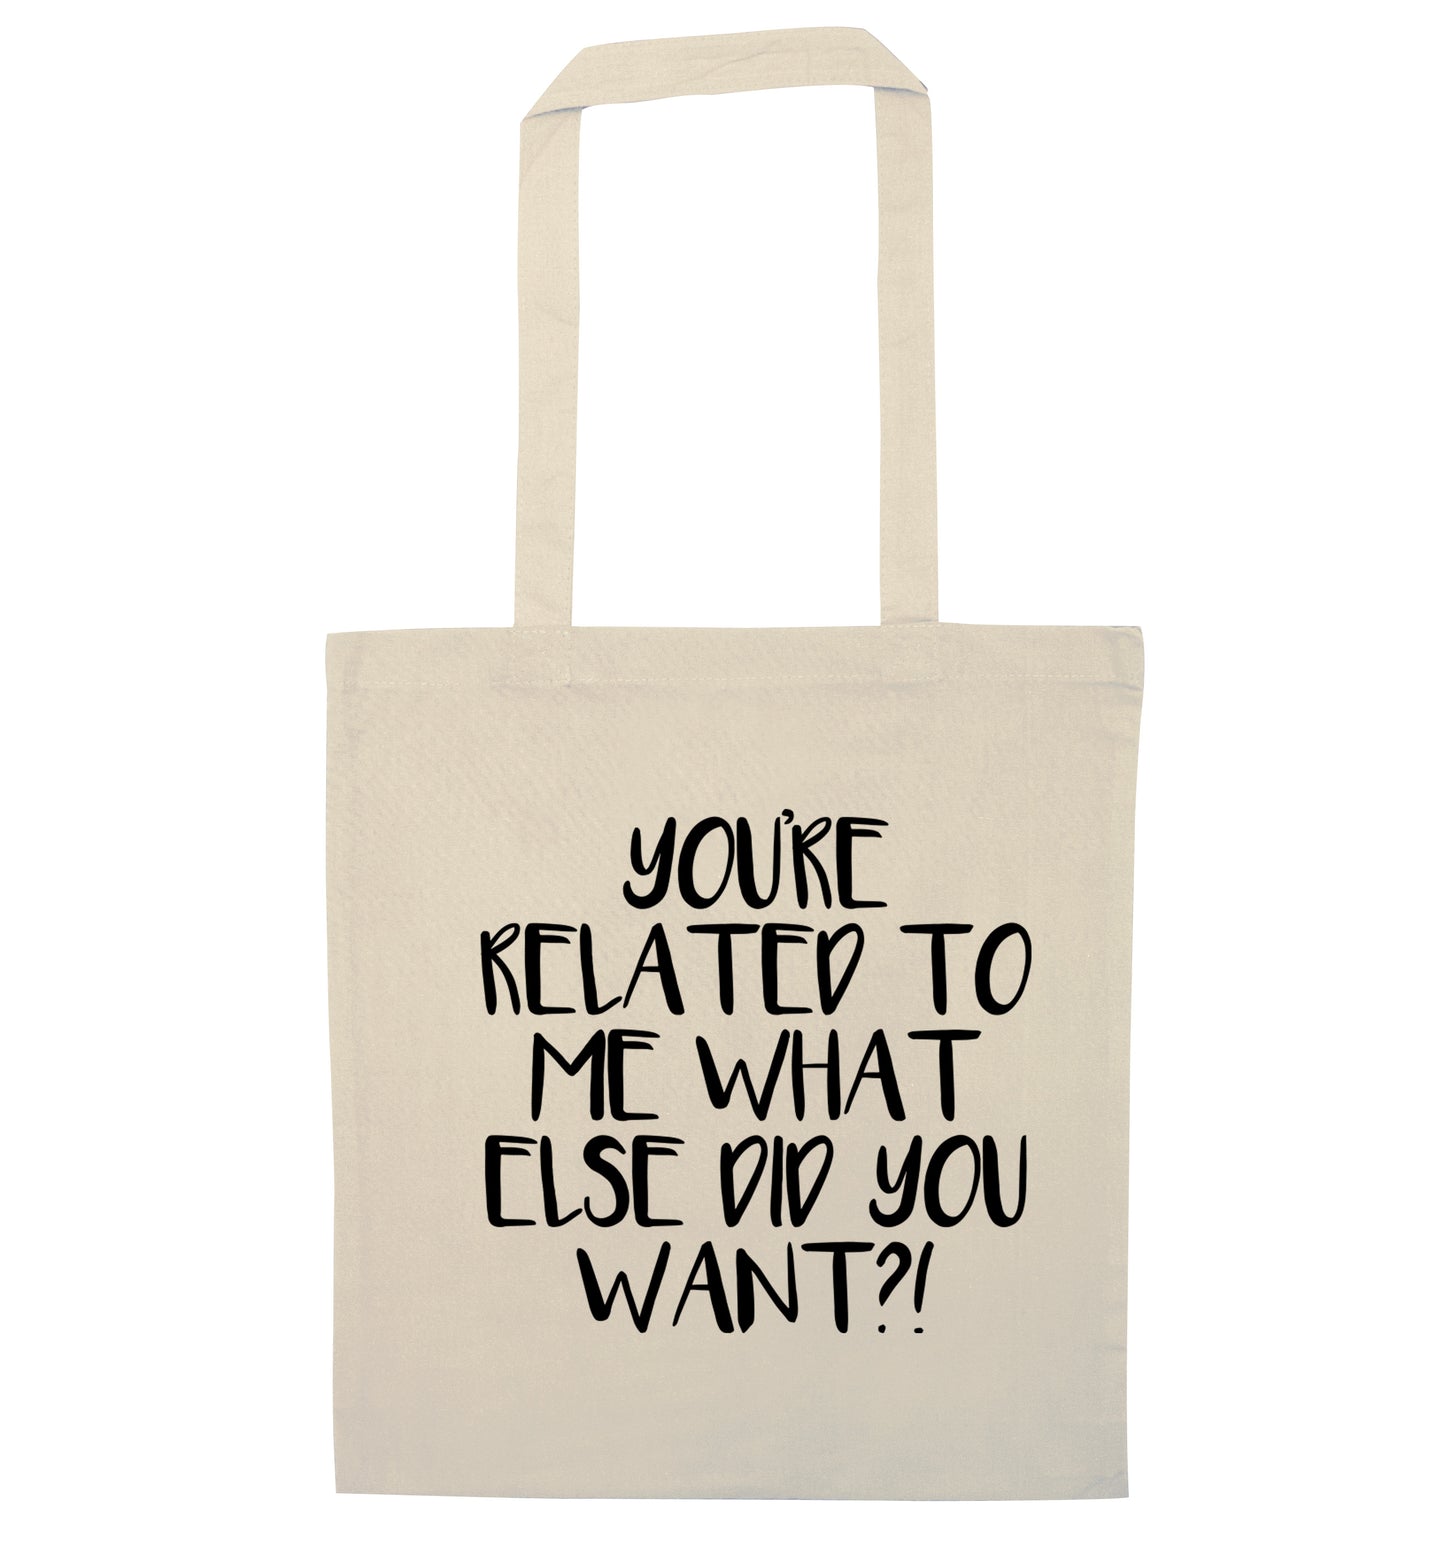 You're related to me what more do you want? natural tote bag